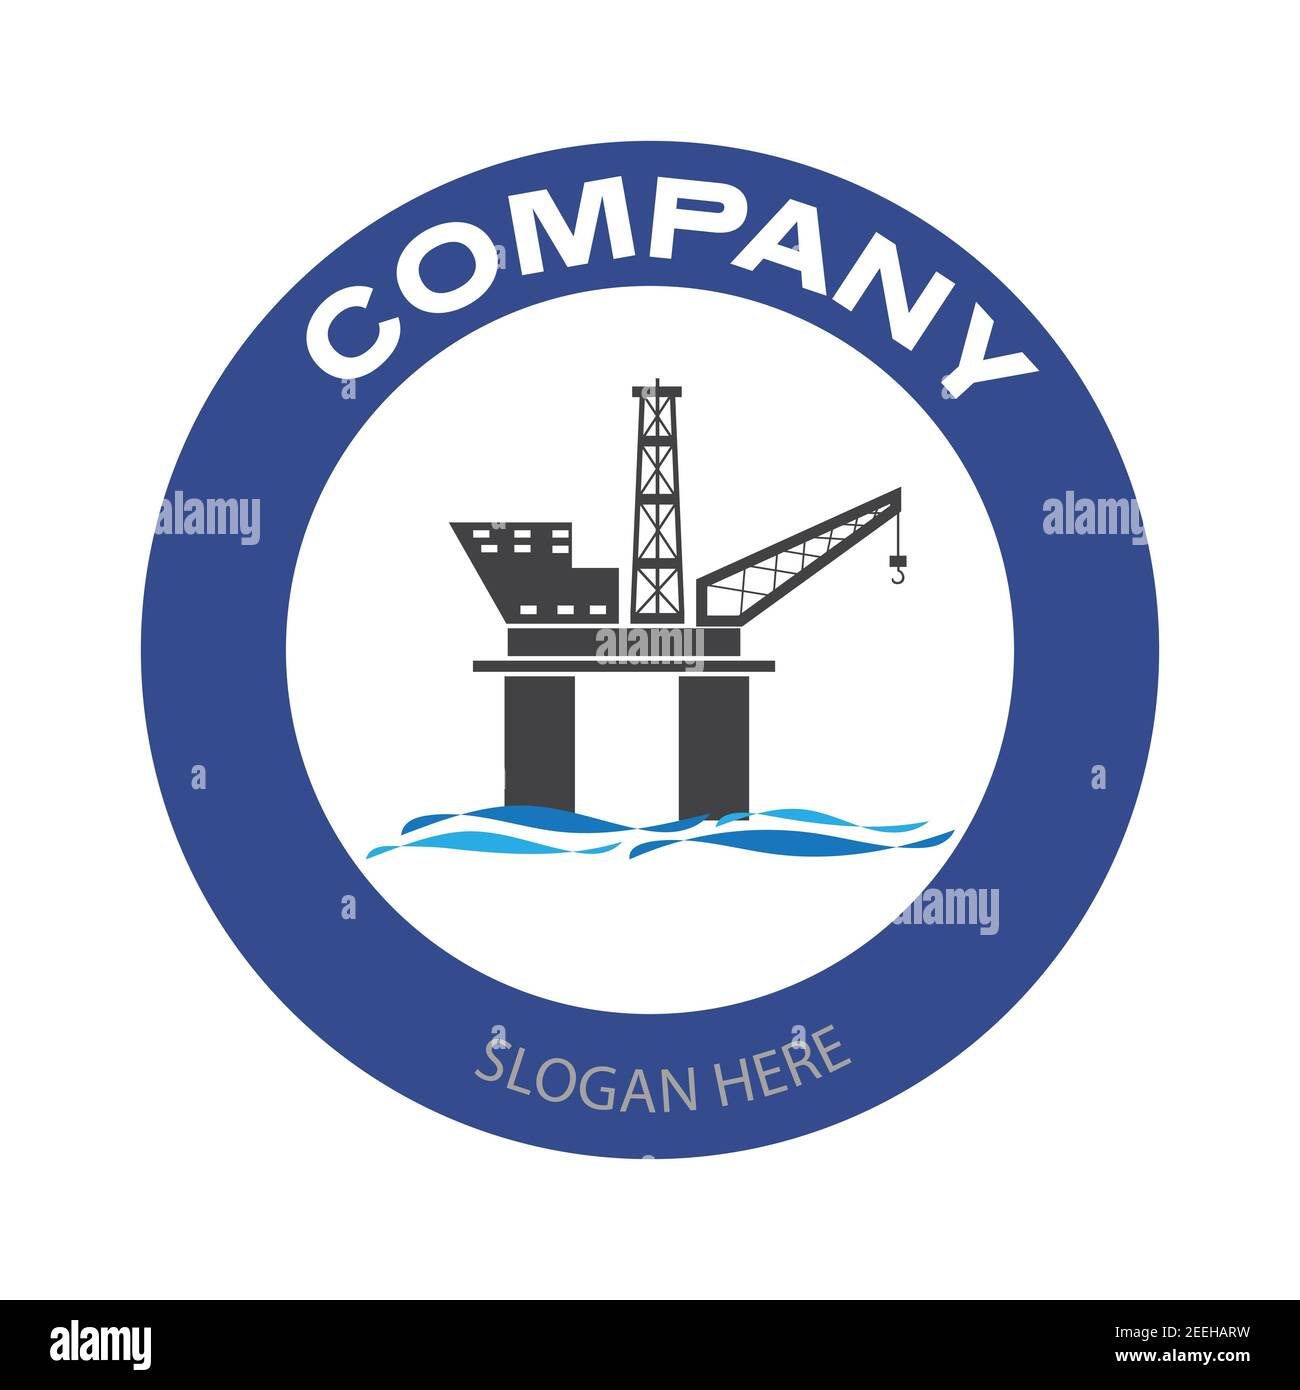 Drilling rig company logo. Offshore oil platform badge in circle. Oil and gas industry vector illustration design Stock Vector